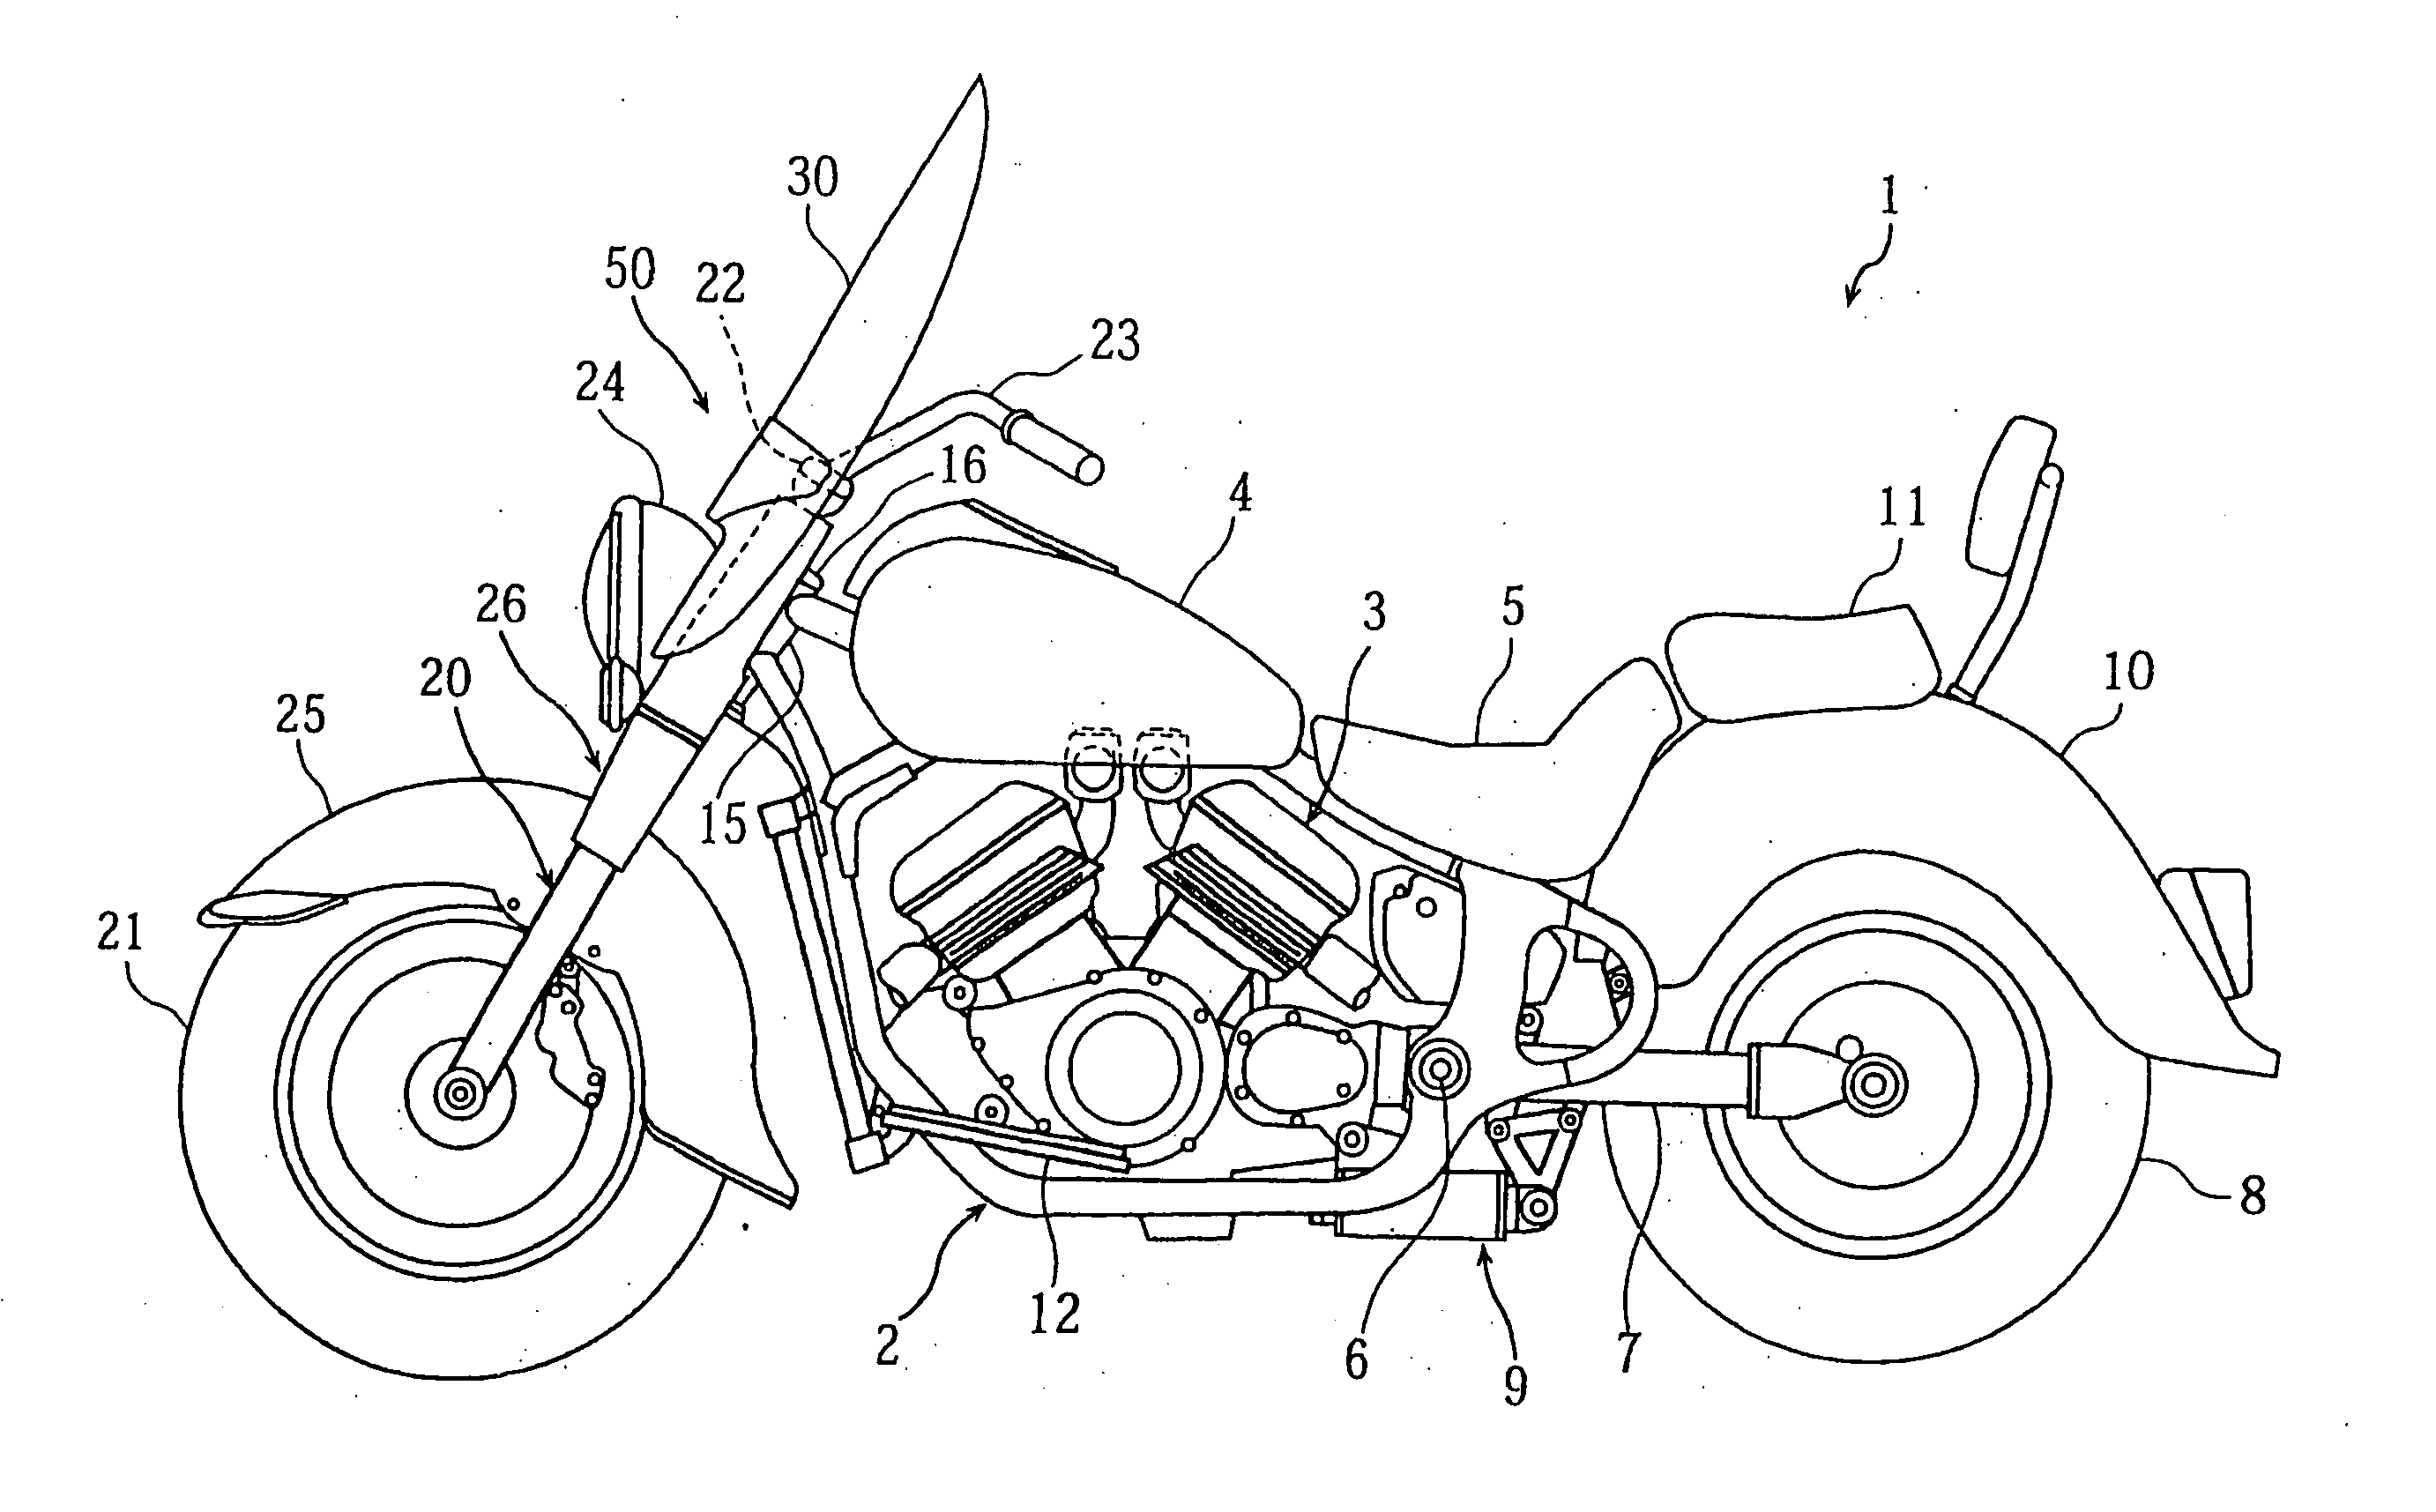 Windscreen device for motorcycle